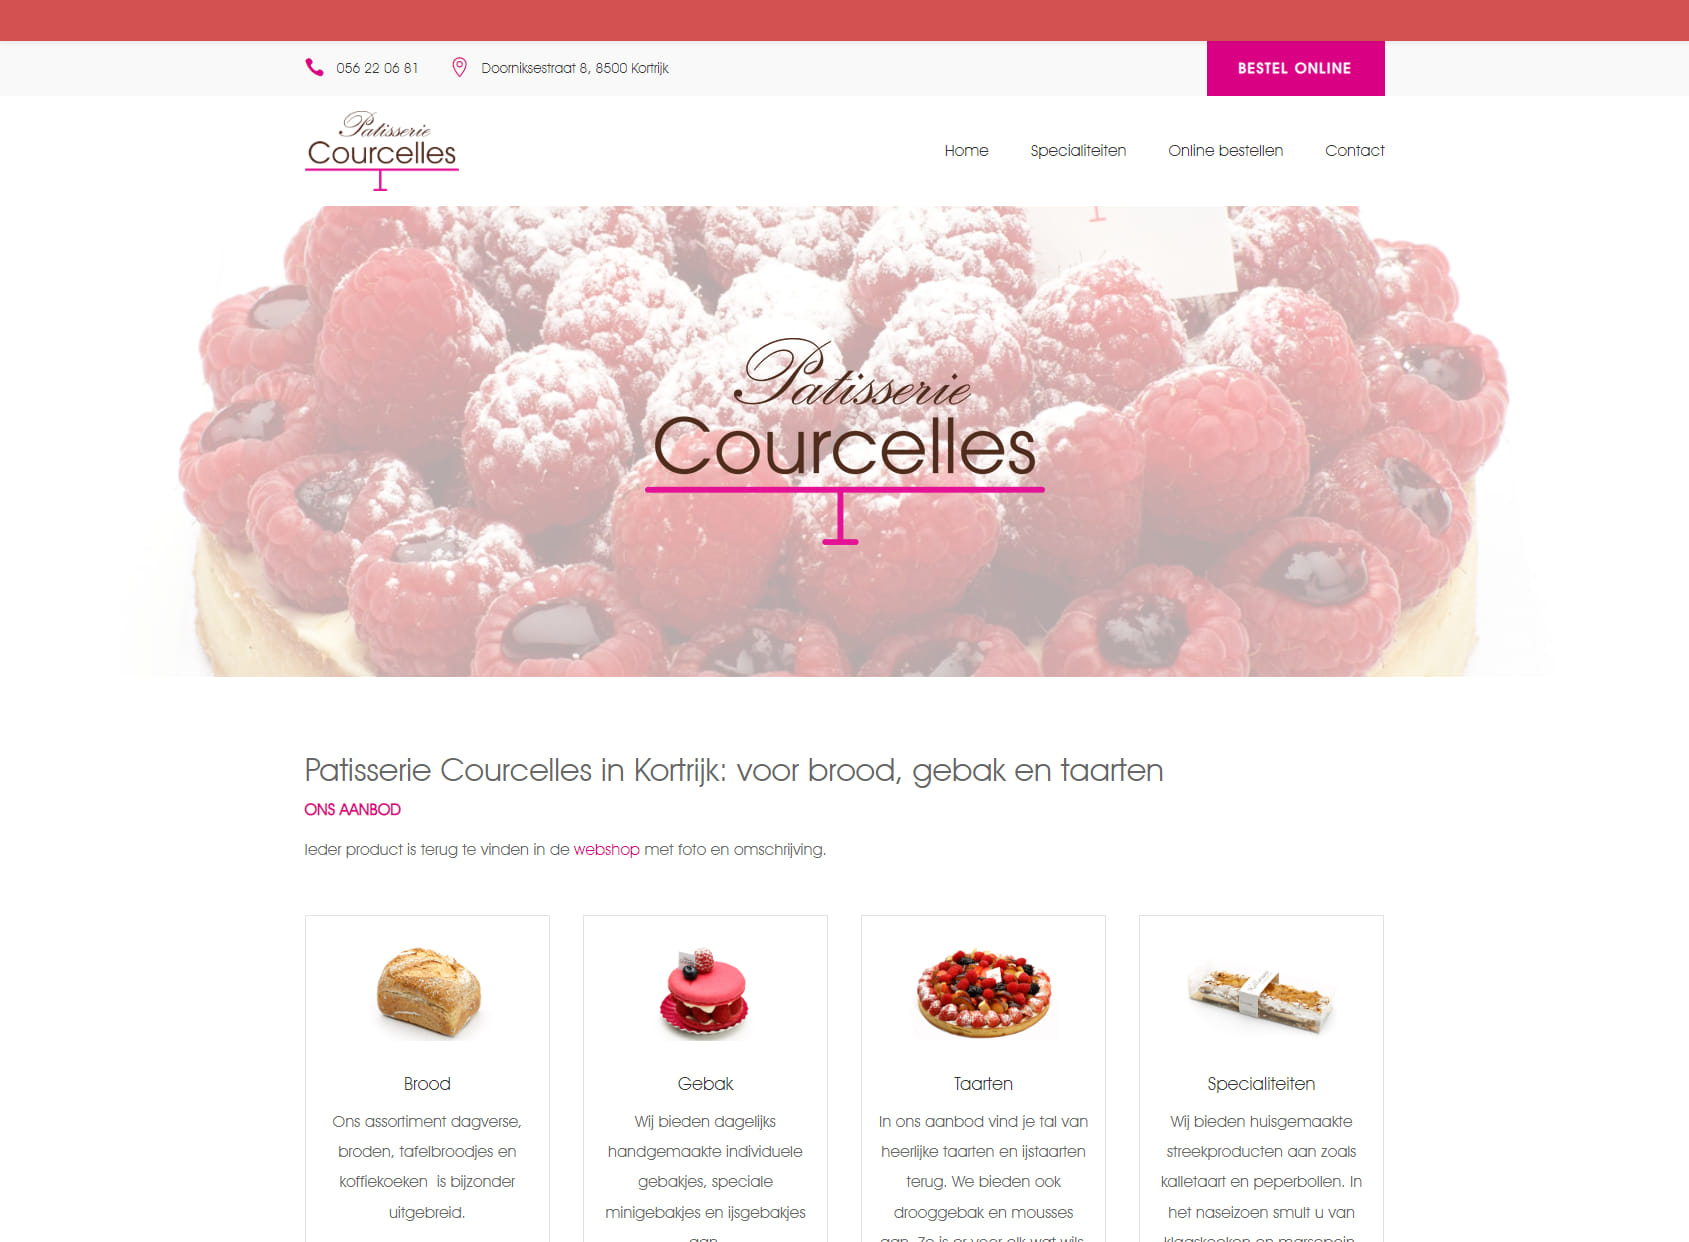 Patisserie Courcelles